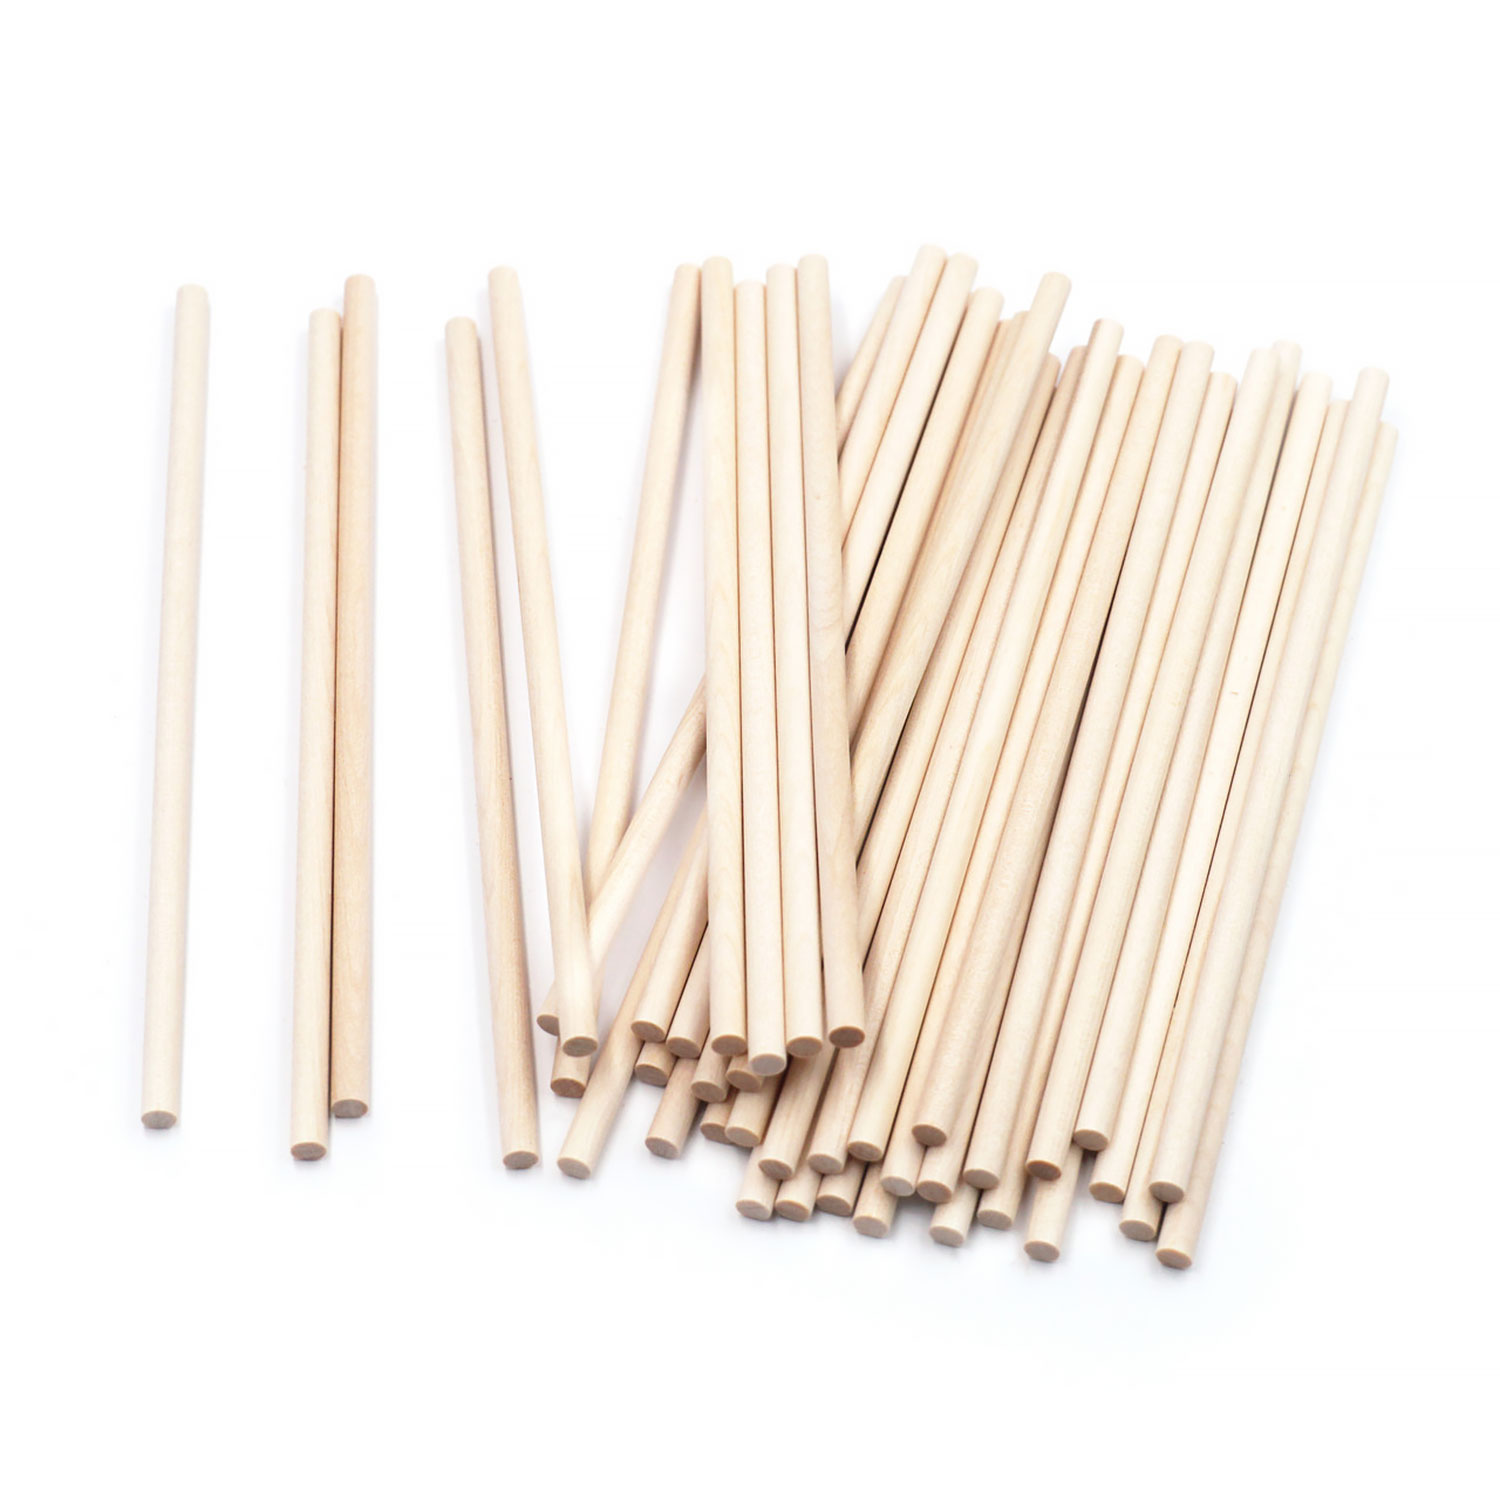 Wood Craft Dowels 6 Inches Tall x 0.2 inch Diameter - 40 Count